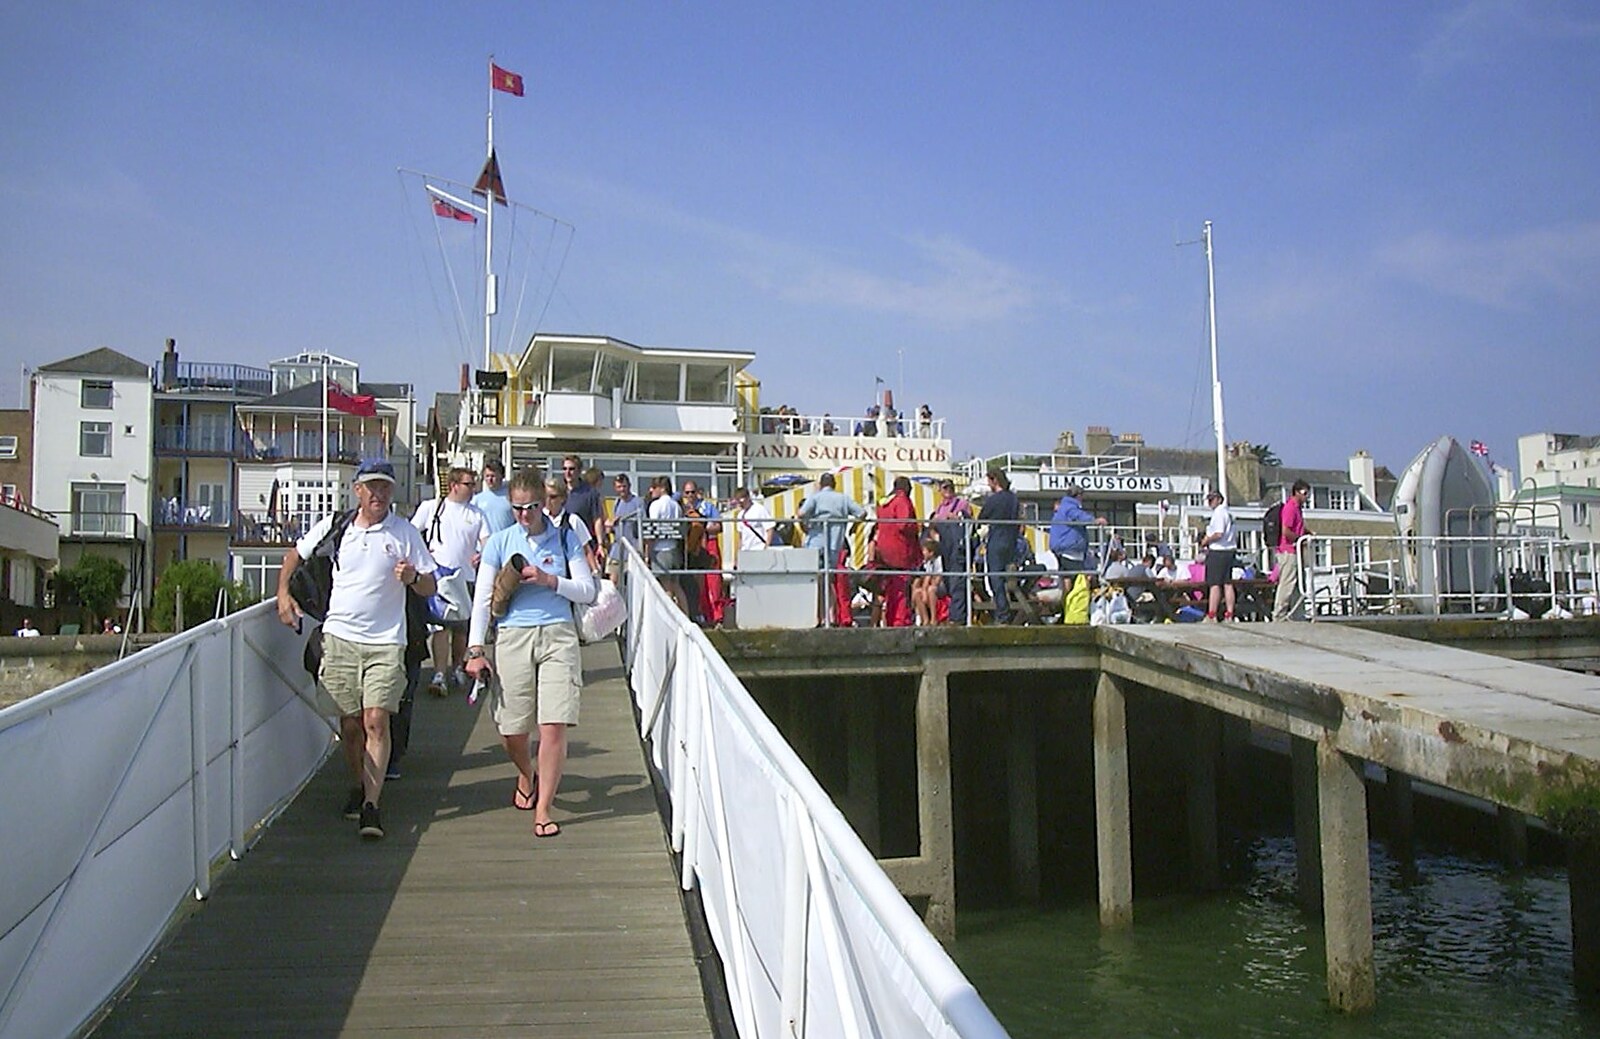 Looking back at the Island Sailing Club from Cowes Weekend, Cowes, Isle of Wight - 7th August 2004